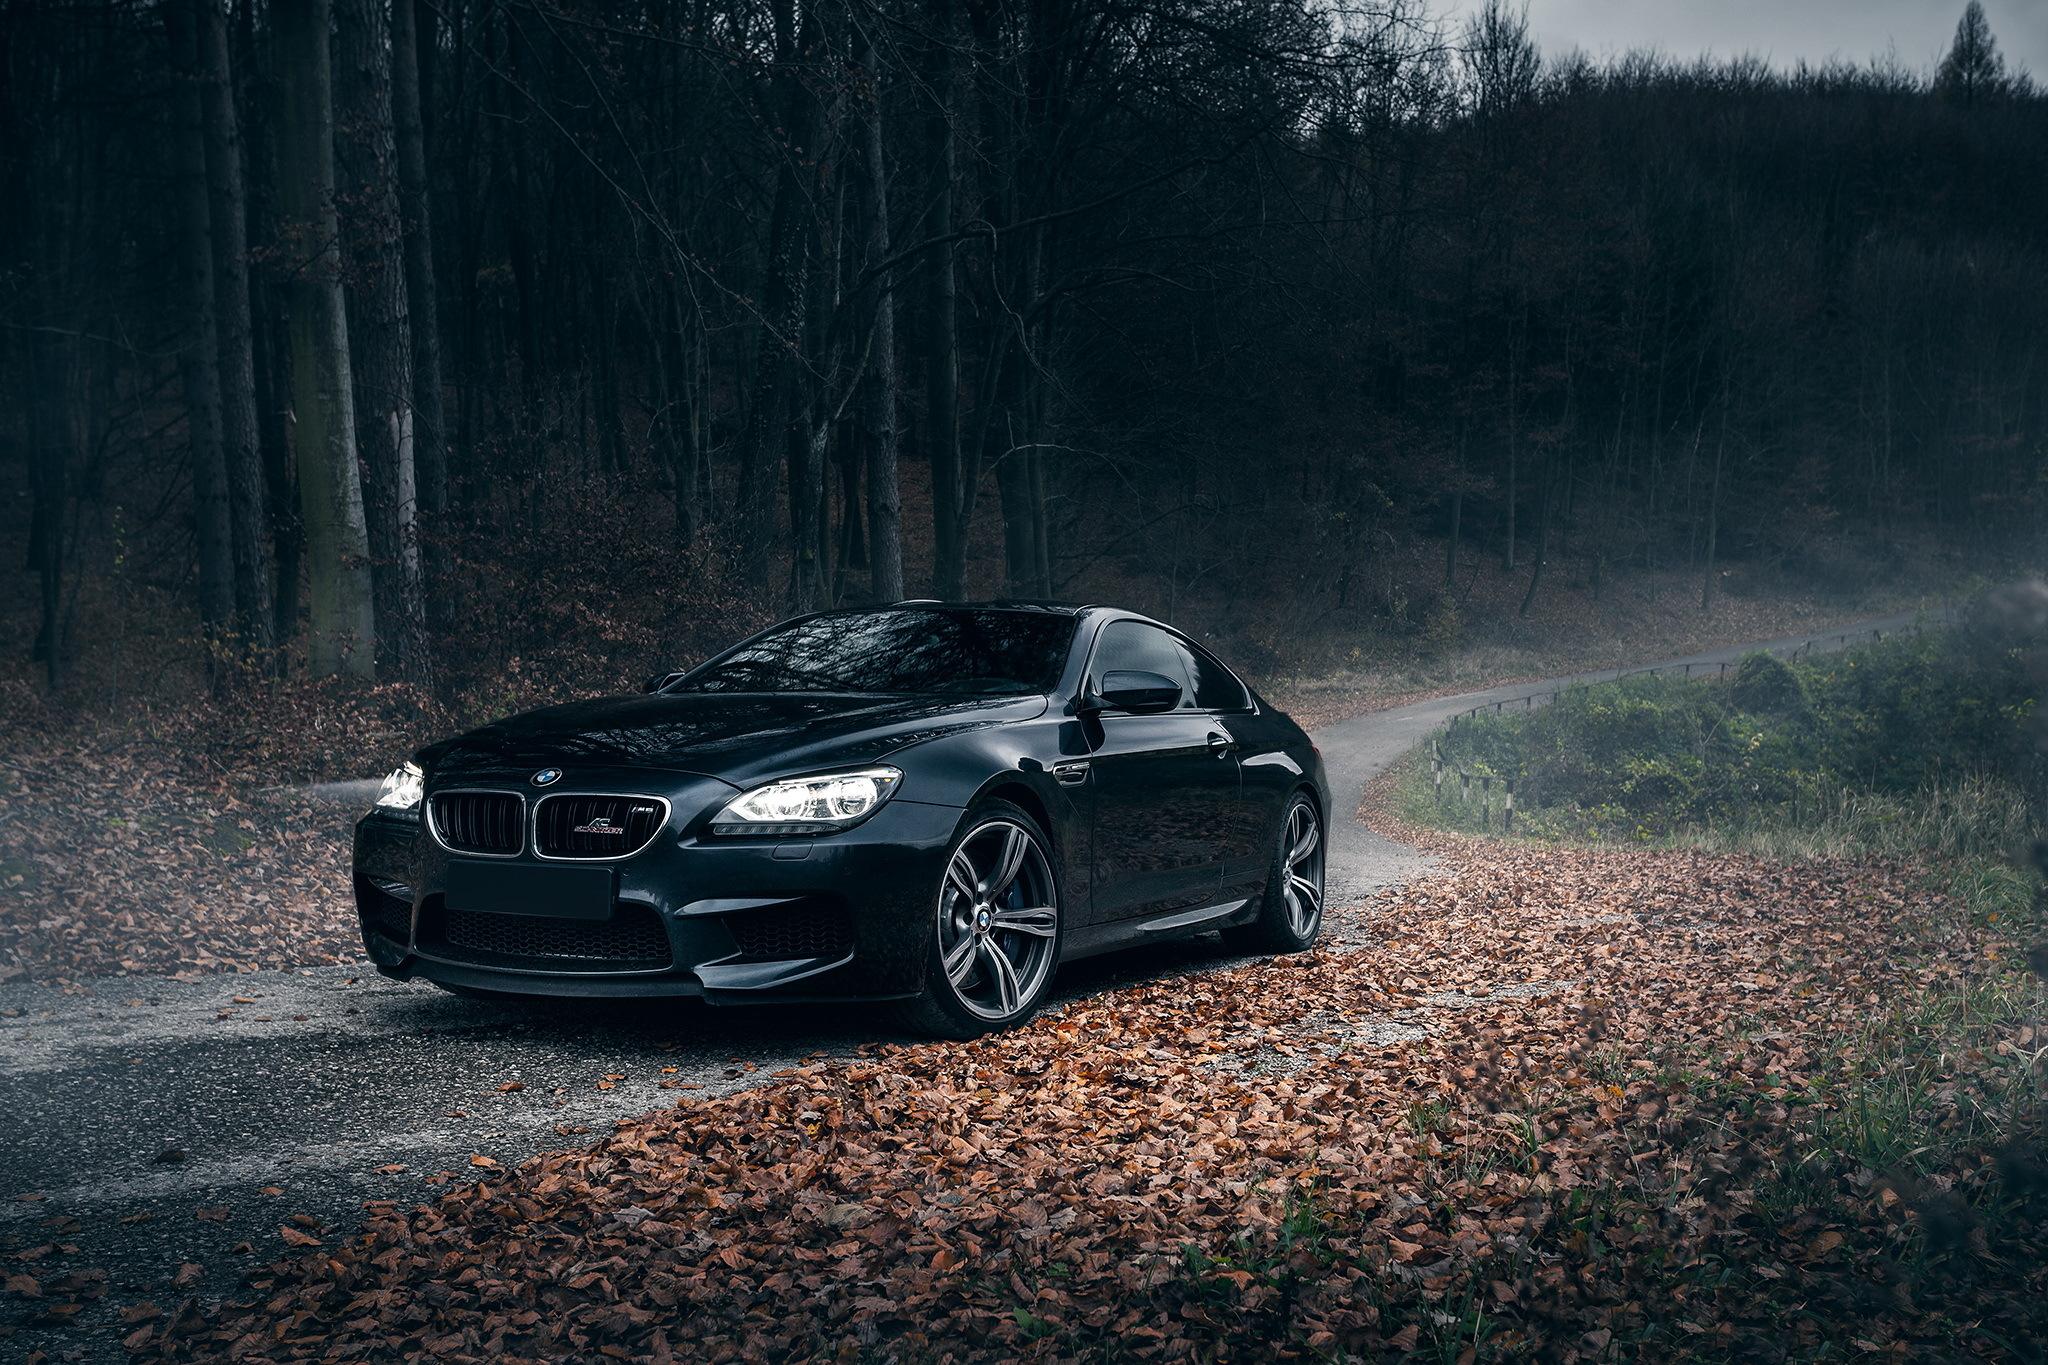 2048 x 1365 · jpeg - BMW M6 Wallpapers, Pictures, Images